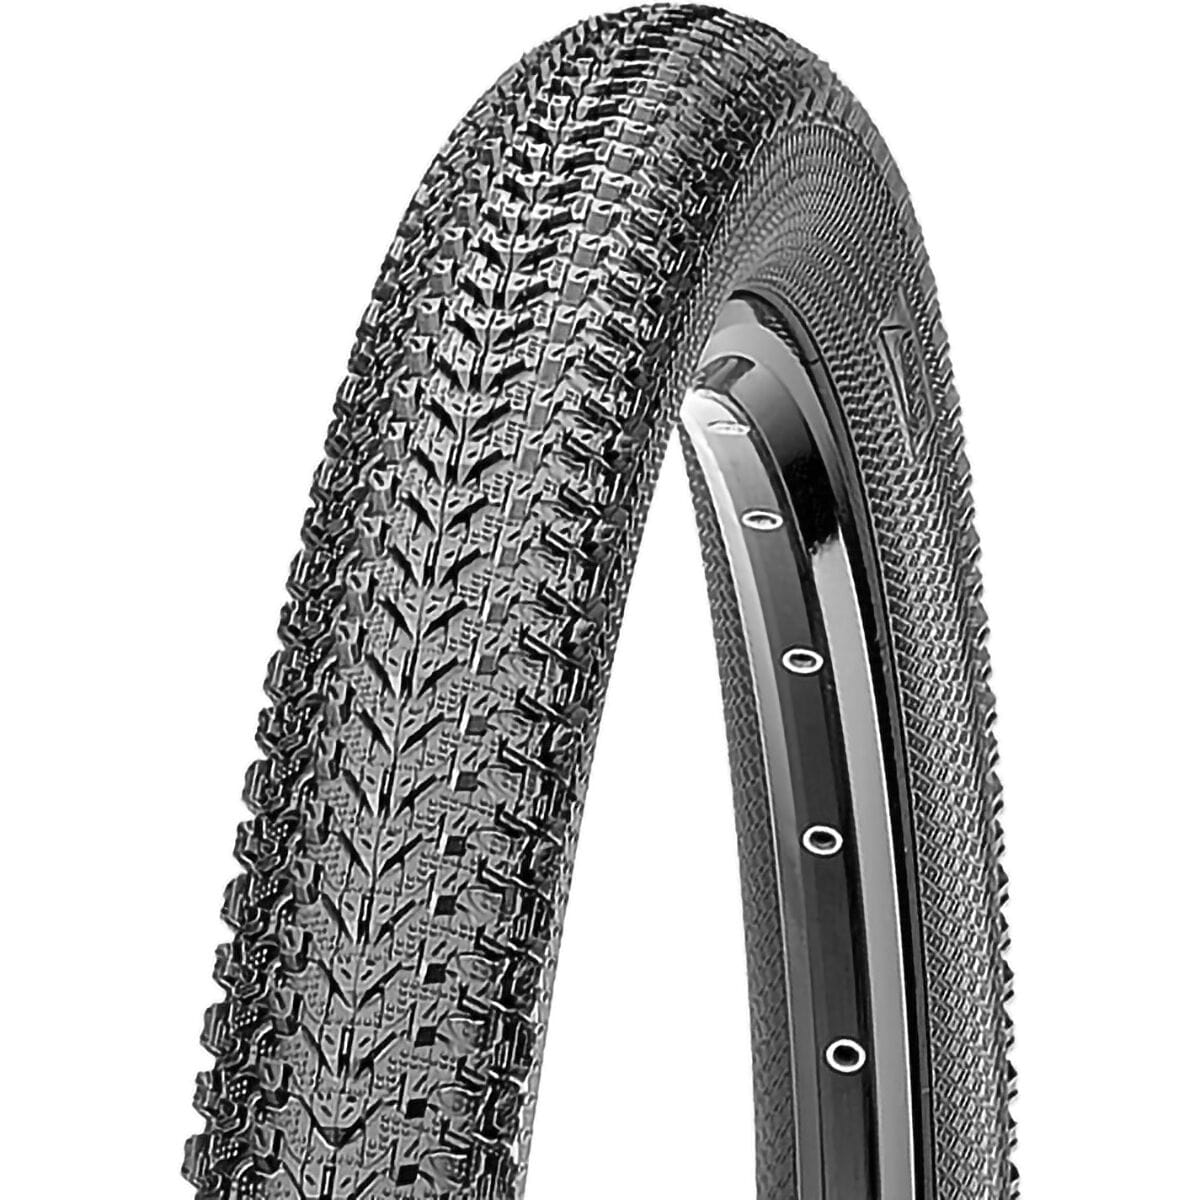 Maxxis Pace Dual Compound EXO/TR 29in Tire